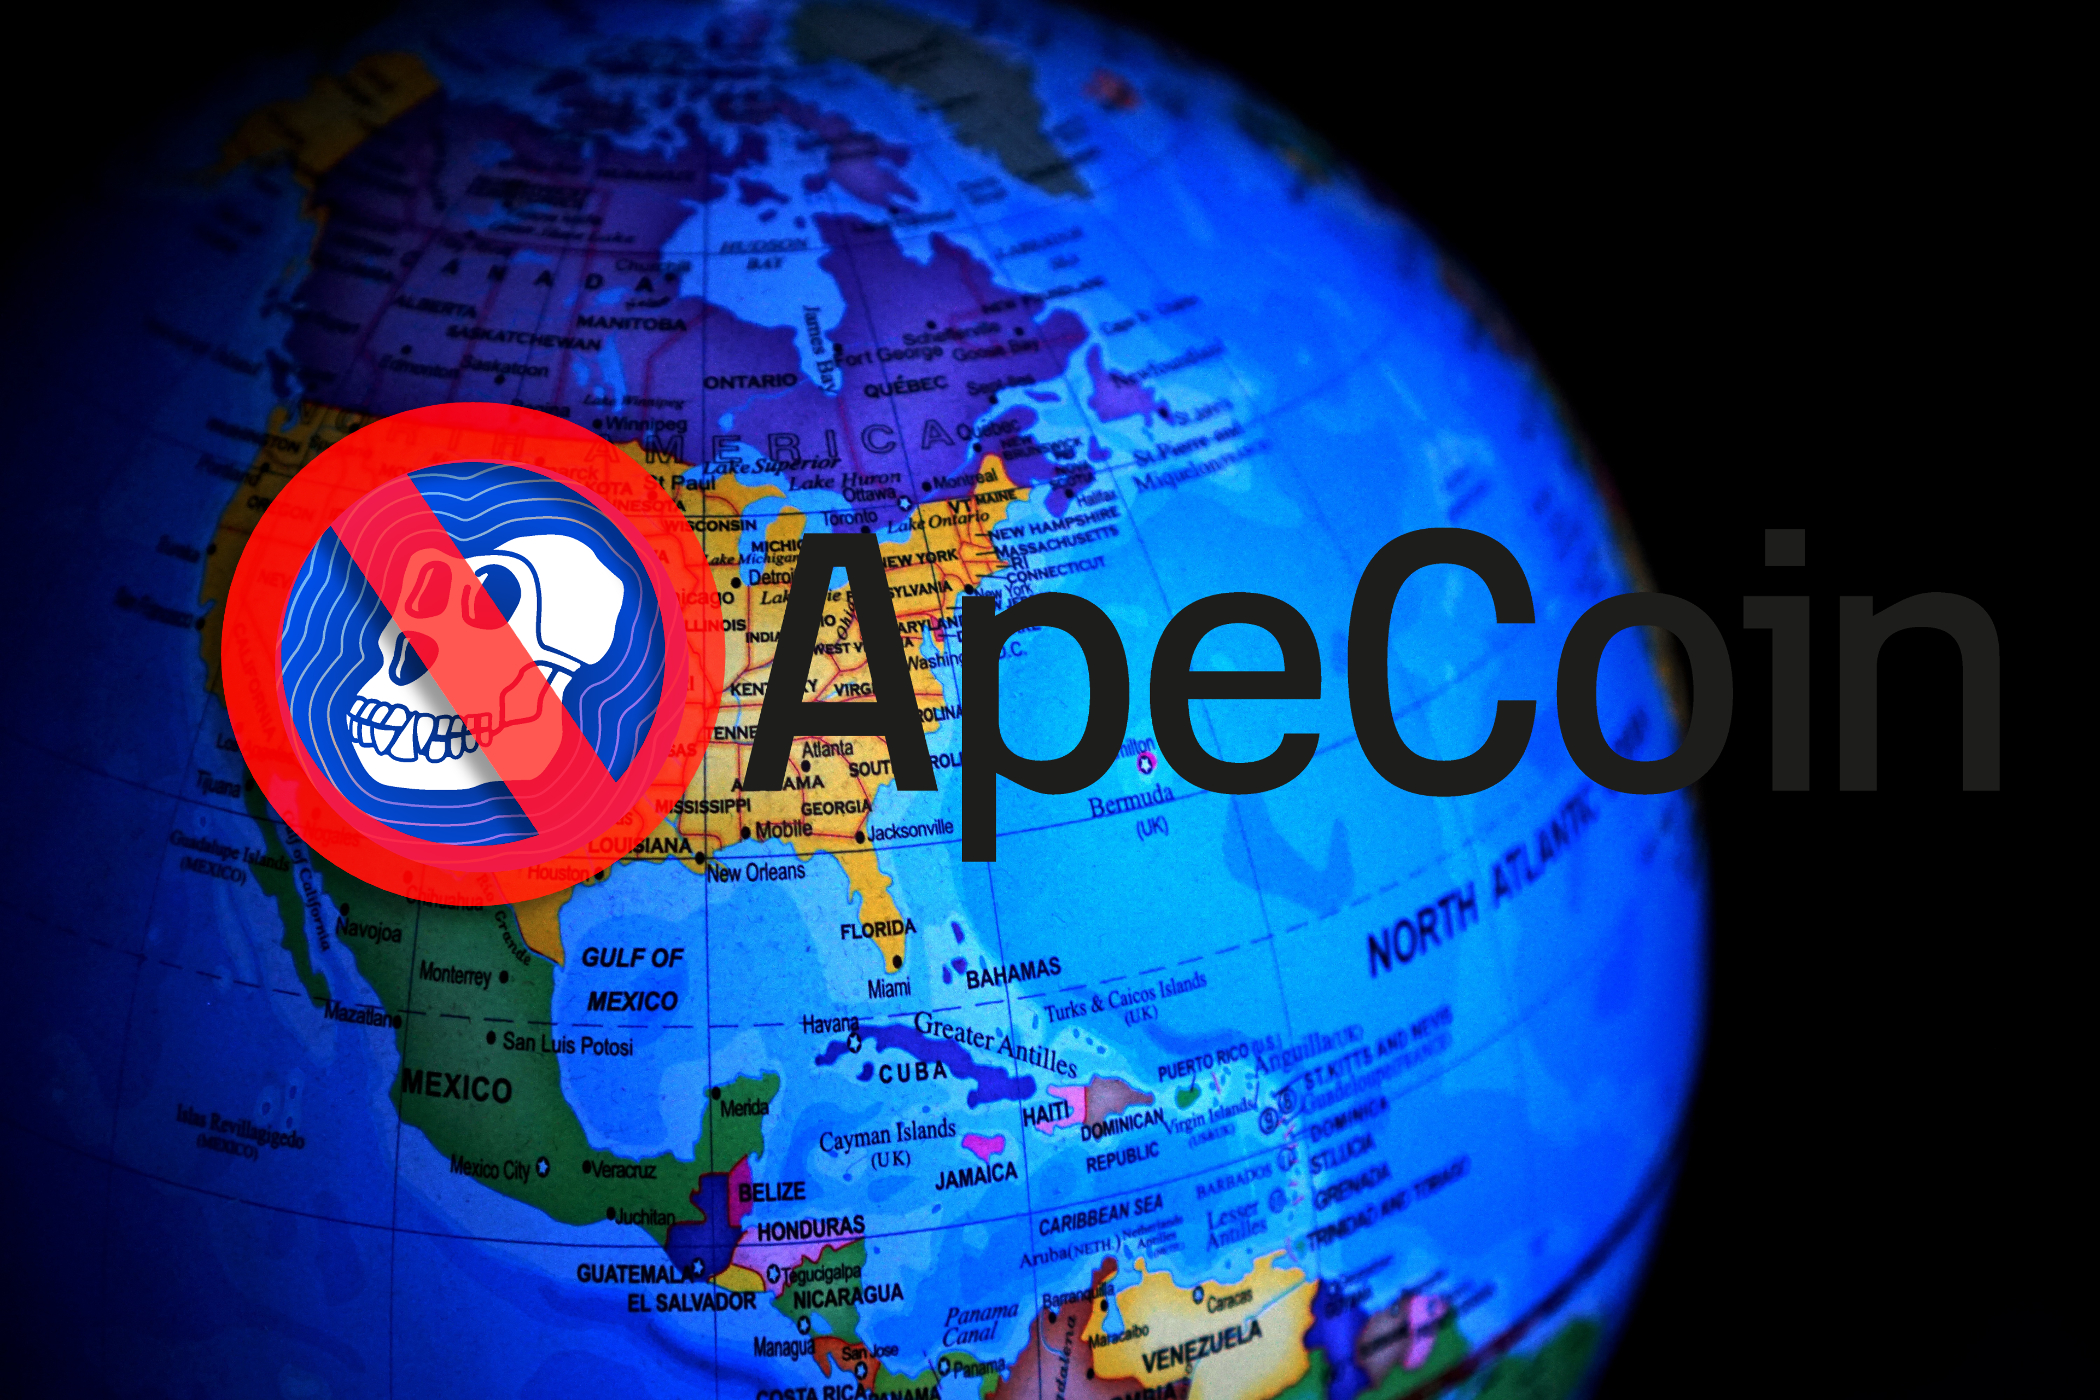 North American investors will not be able to stake ApeCoins